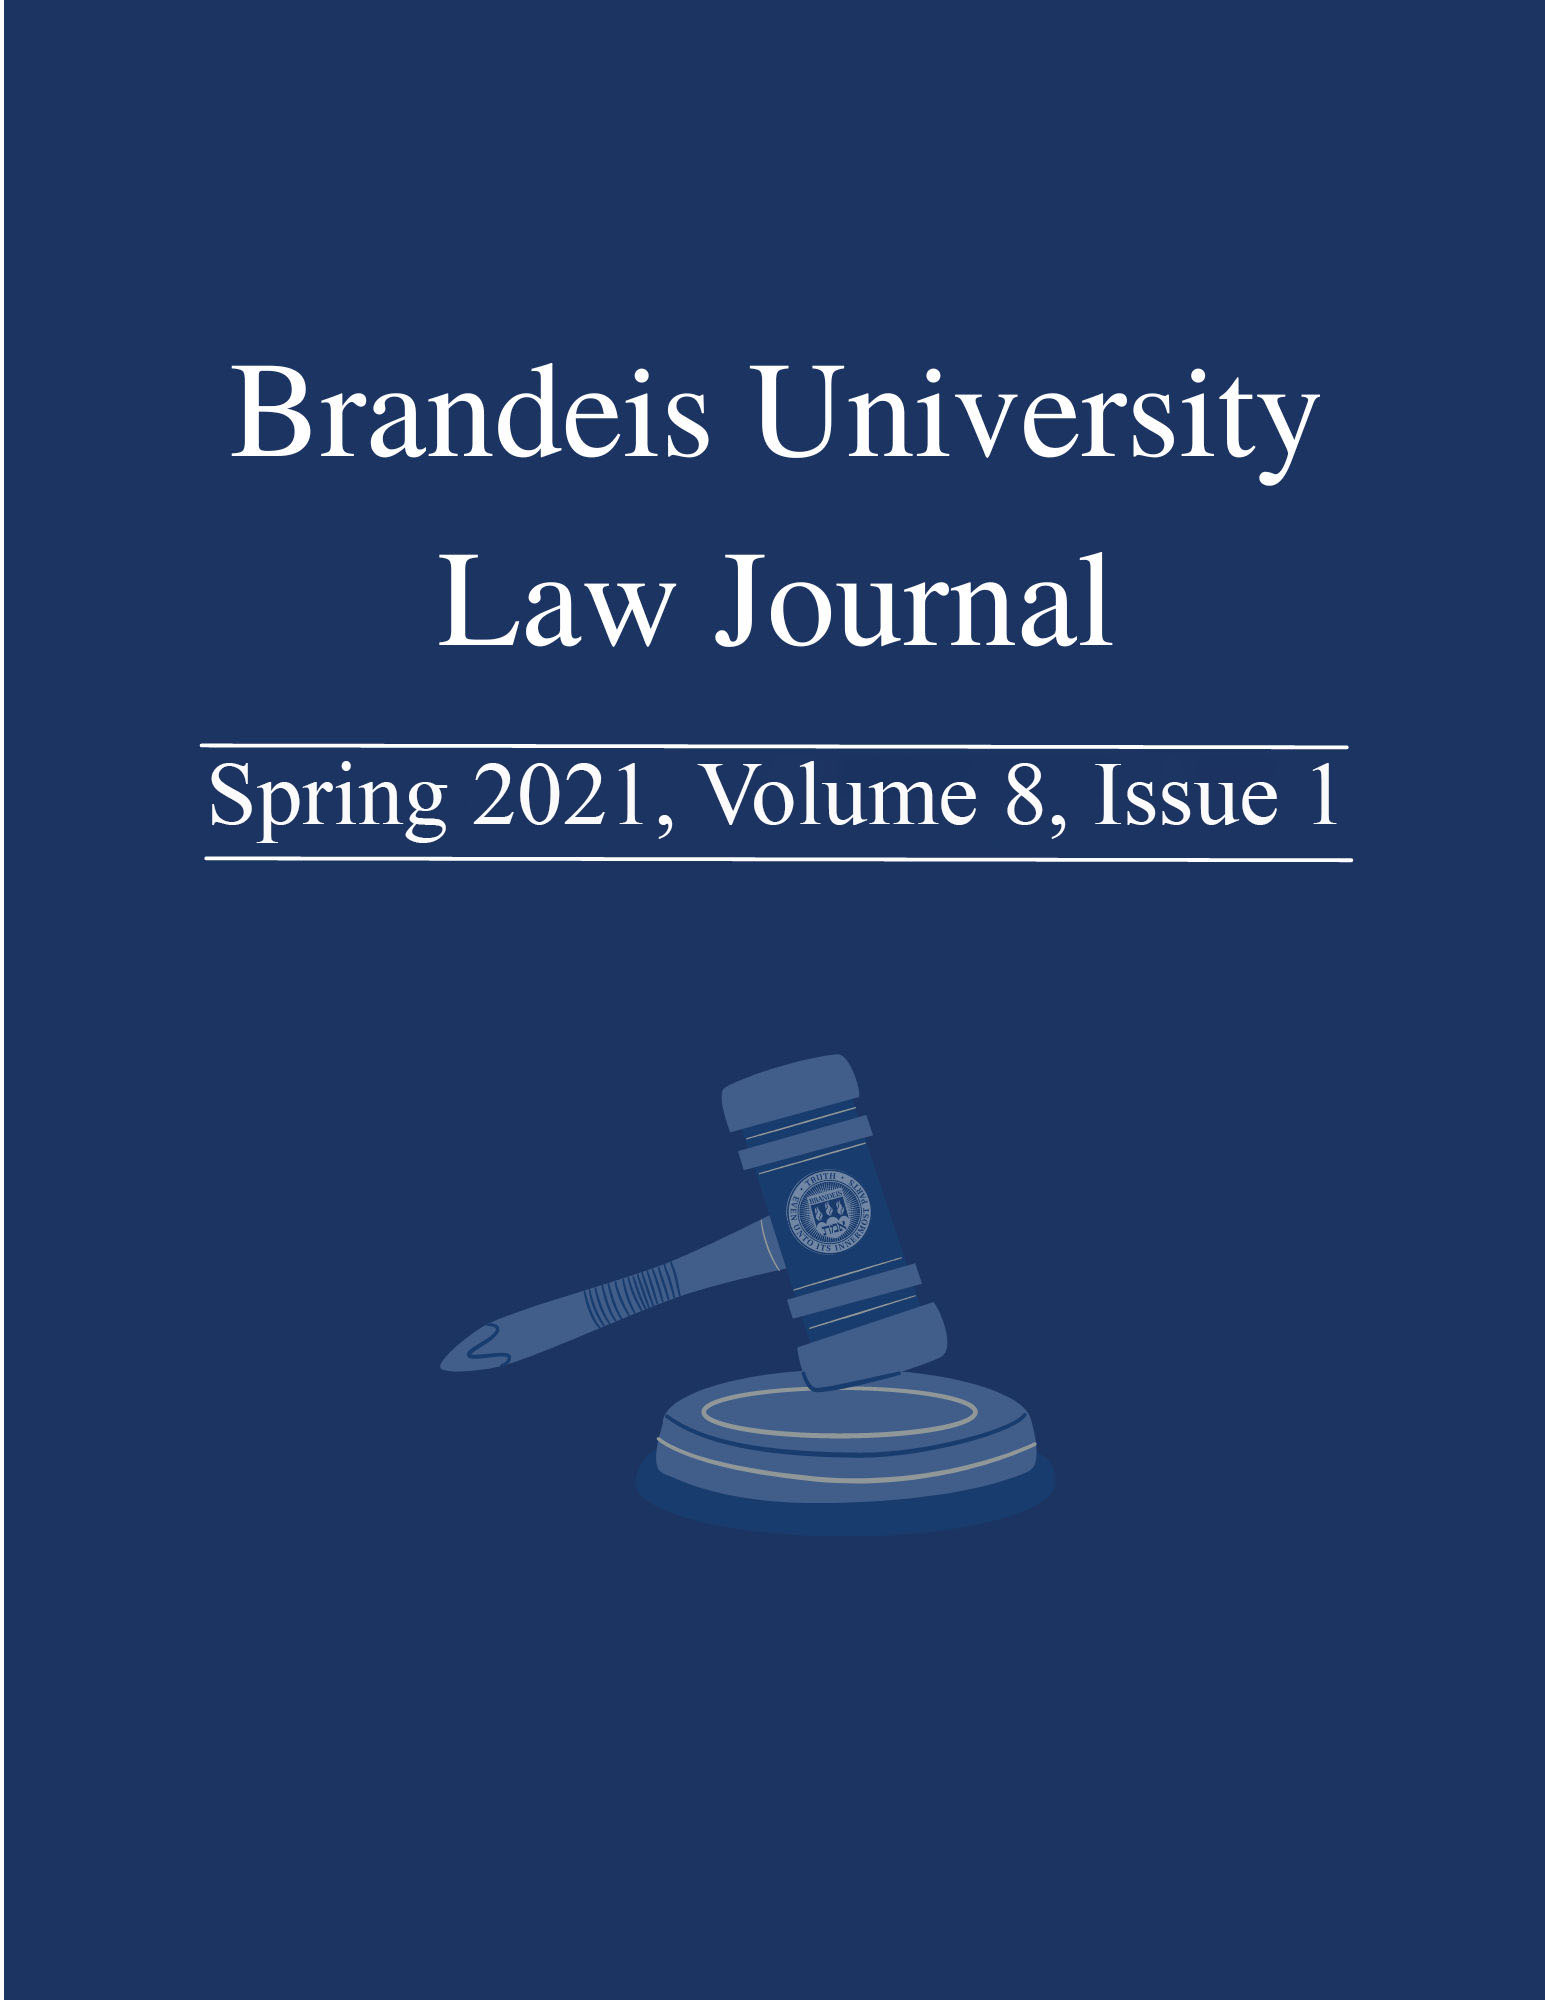 Brandeis University Law Journal cover art depicting a brown gavel on a blue ground.